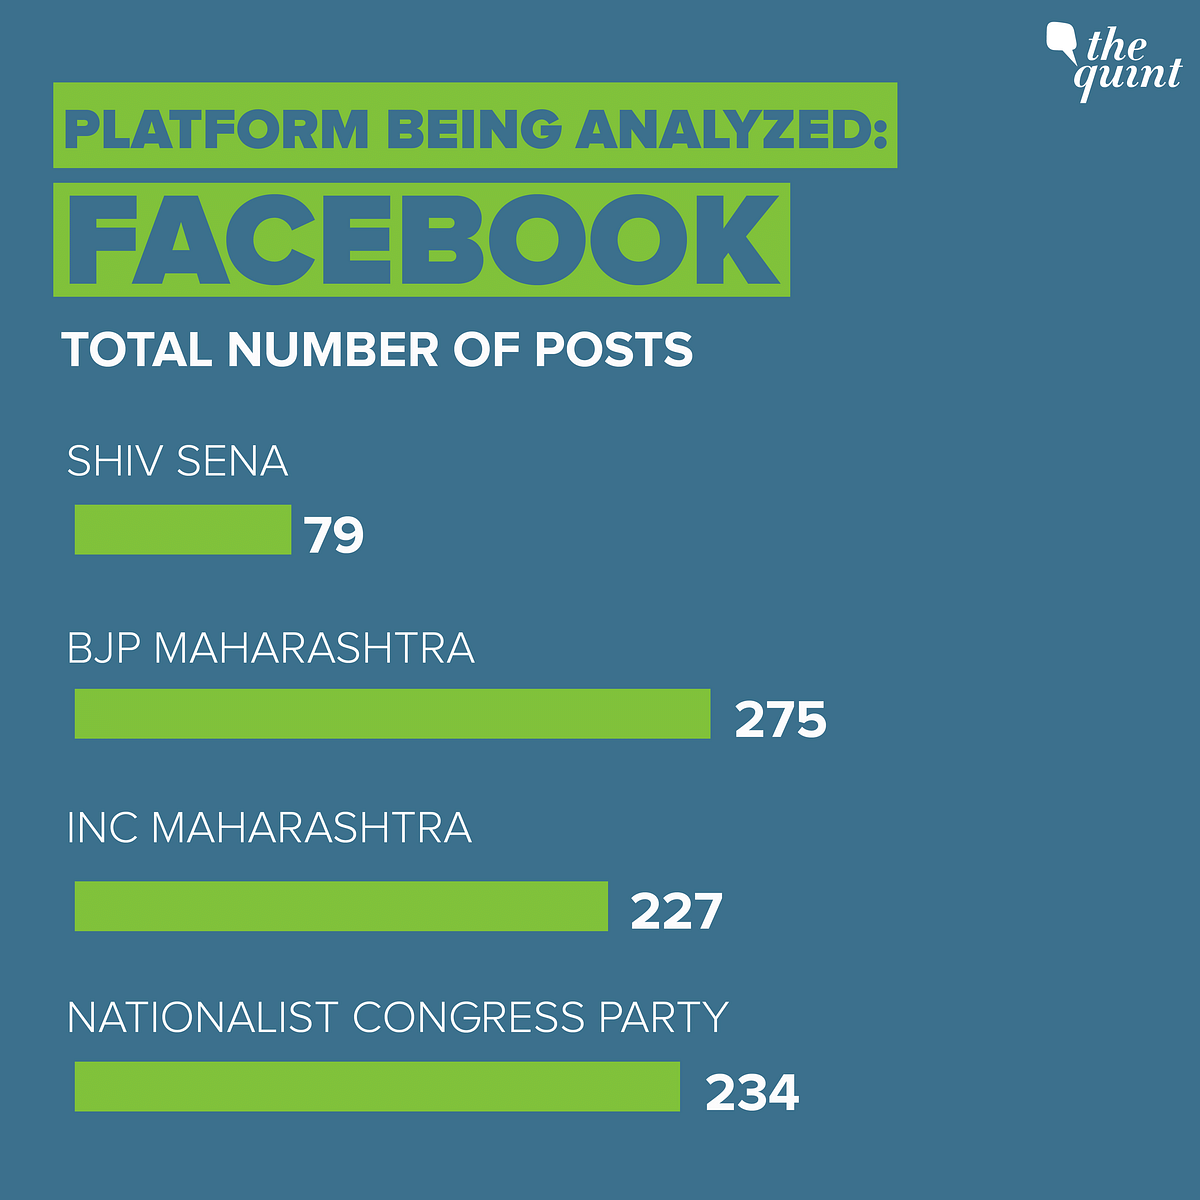 As Maharashtra votes this Oct for state elections, The Quint analyzes Shiv Sena, BJP, NCP & INC’s social media game.